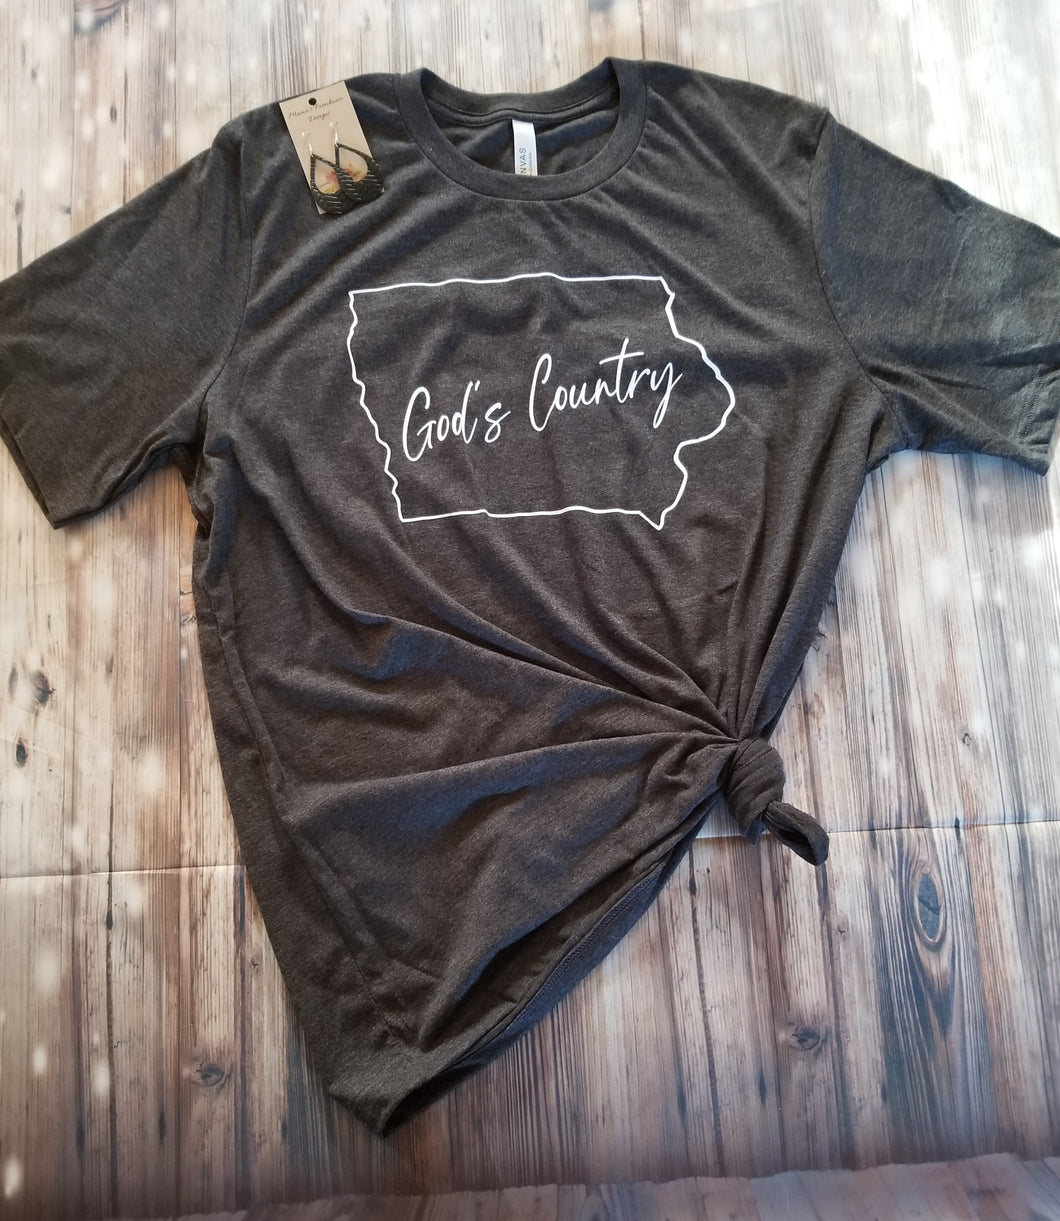 Iowa is God's Country T-Shirt